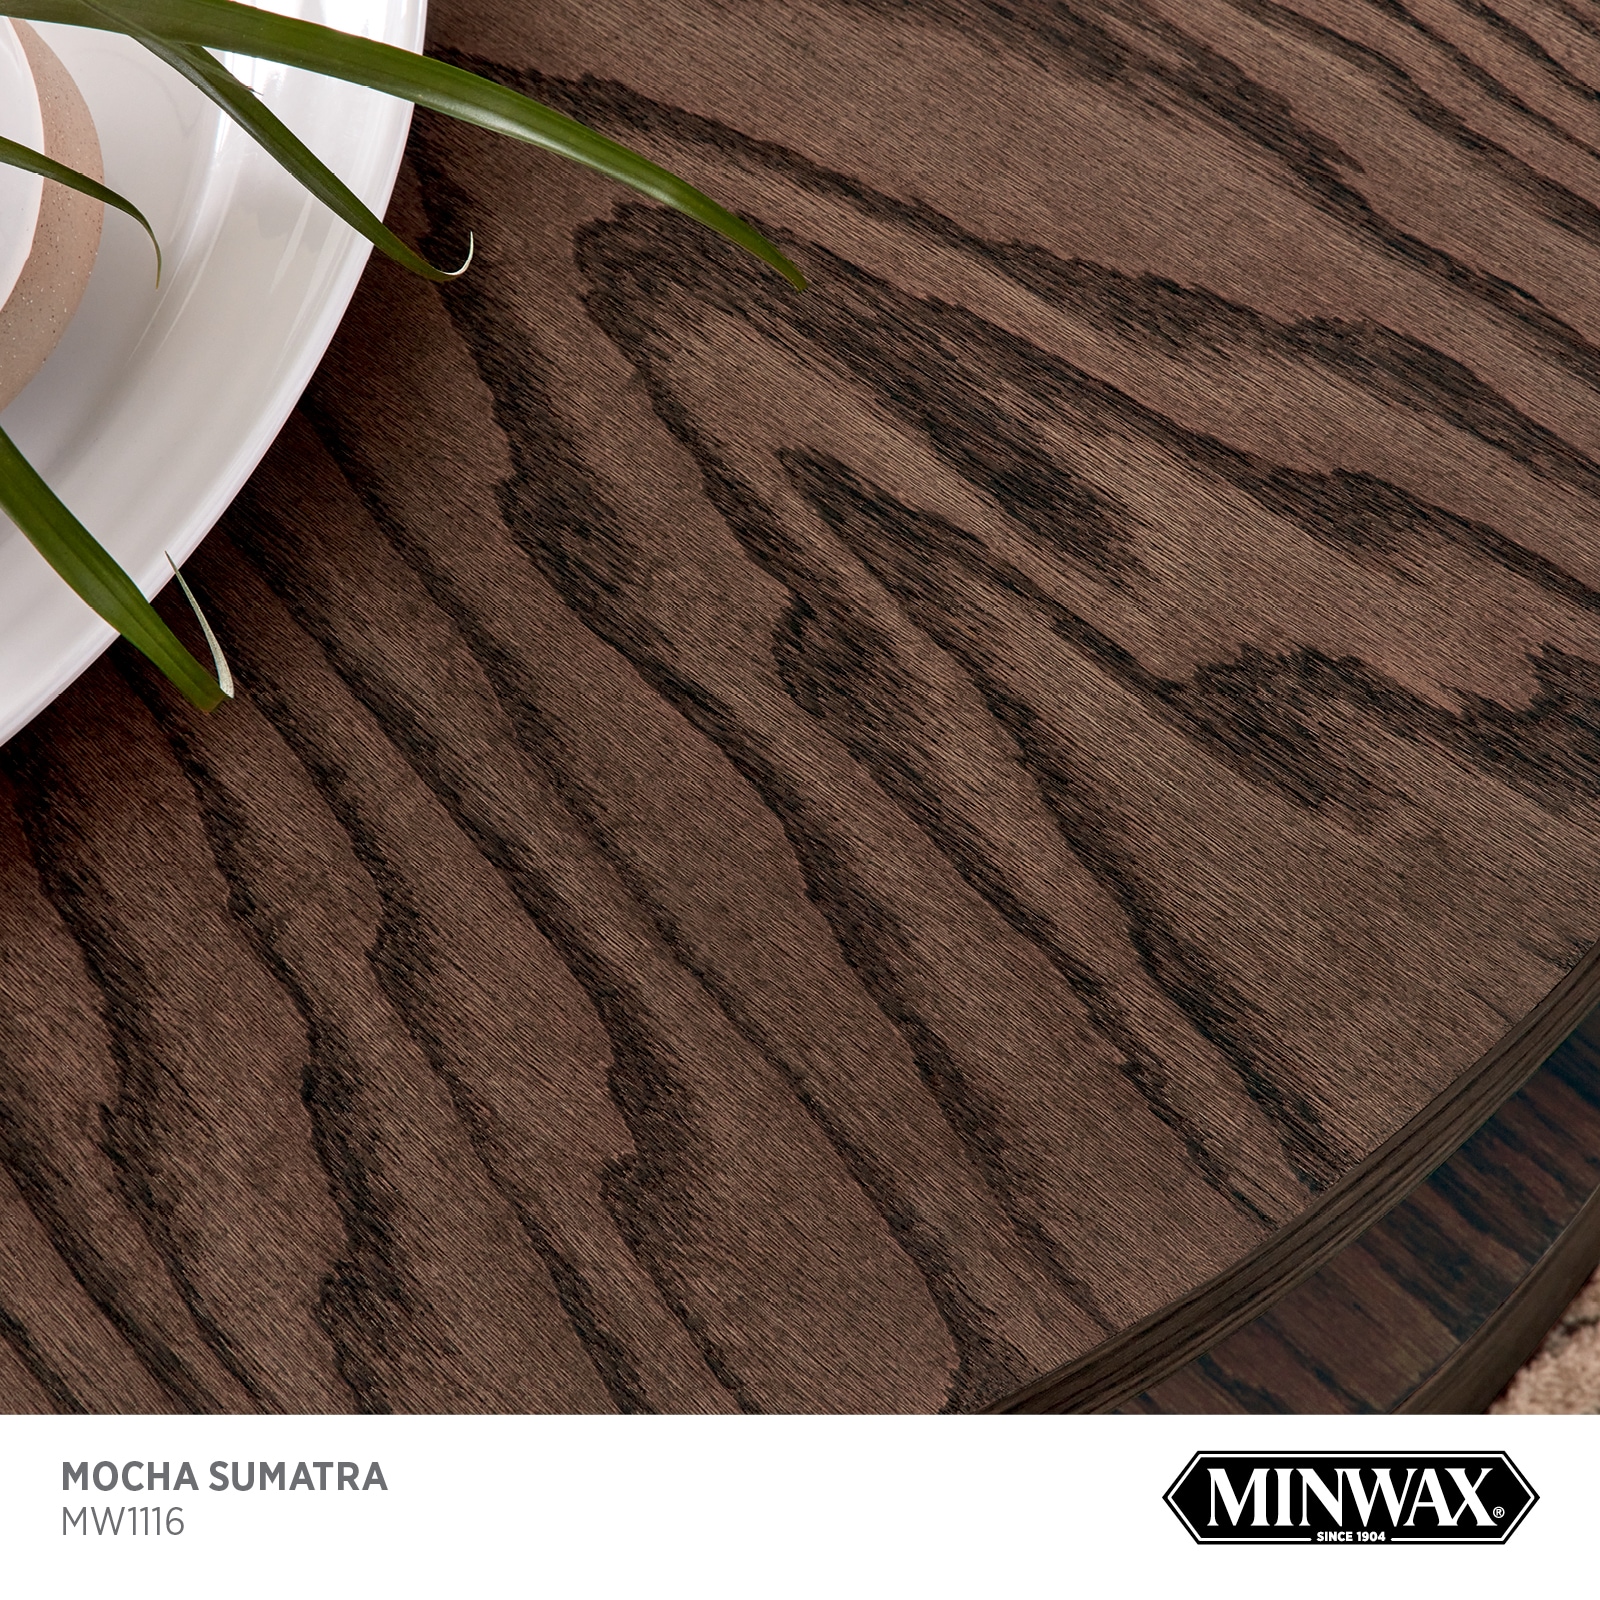 department Interior Minwax Semi-Transparent Finish Mocha Sumatra Stains in (1-Quart) at Stain Mw1116 Water-Based Interior Wood the